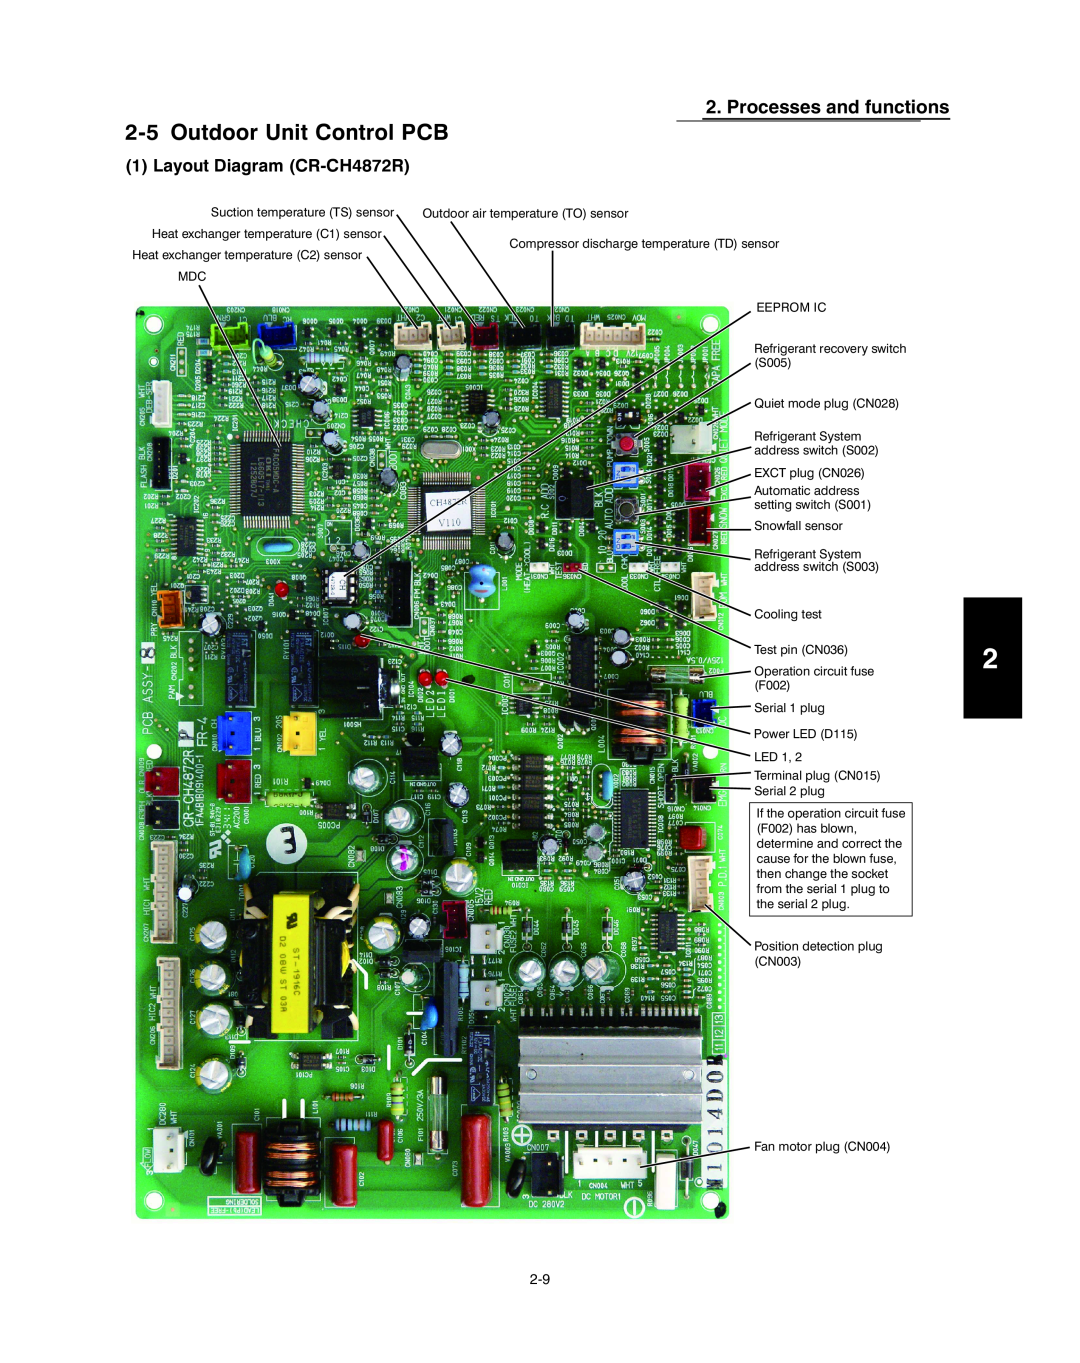 Panasonic R410A service manual 2-5Outdoor Unit Control PCB, Processes and functions, Layout Diagram CR-CH4872R 